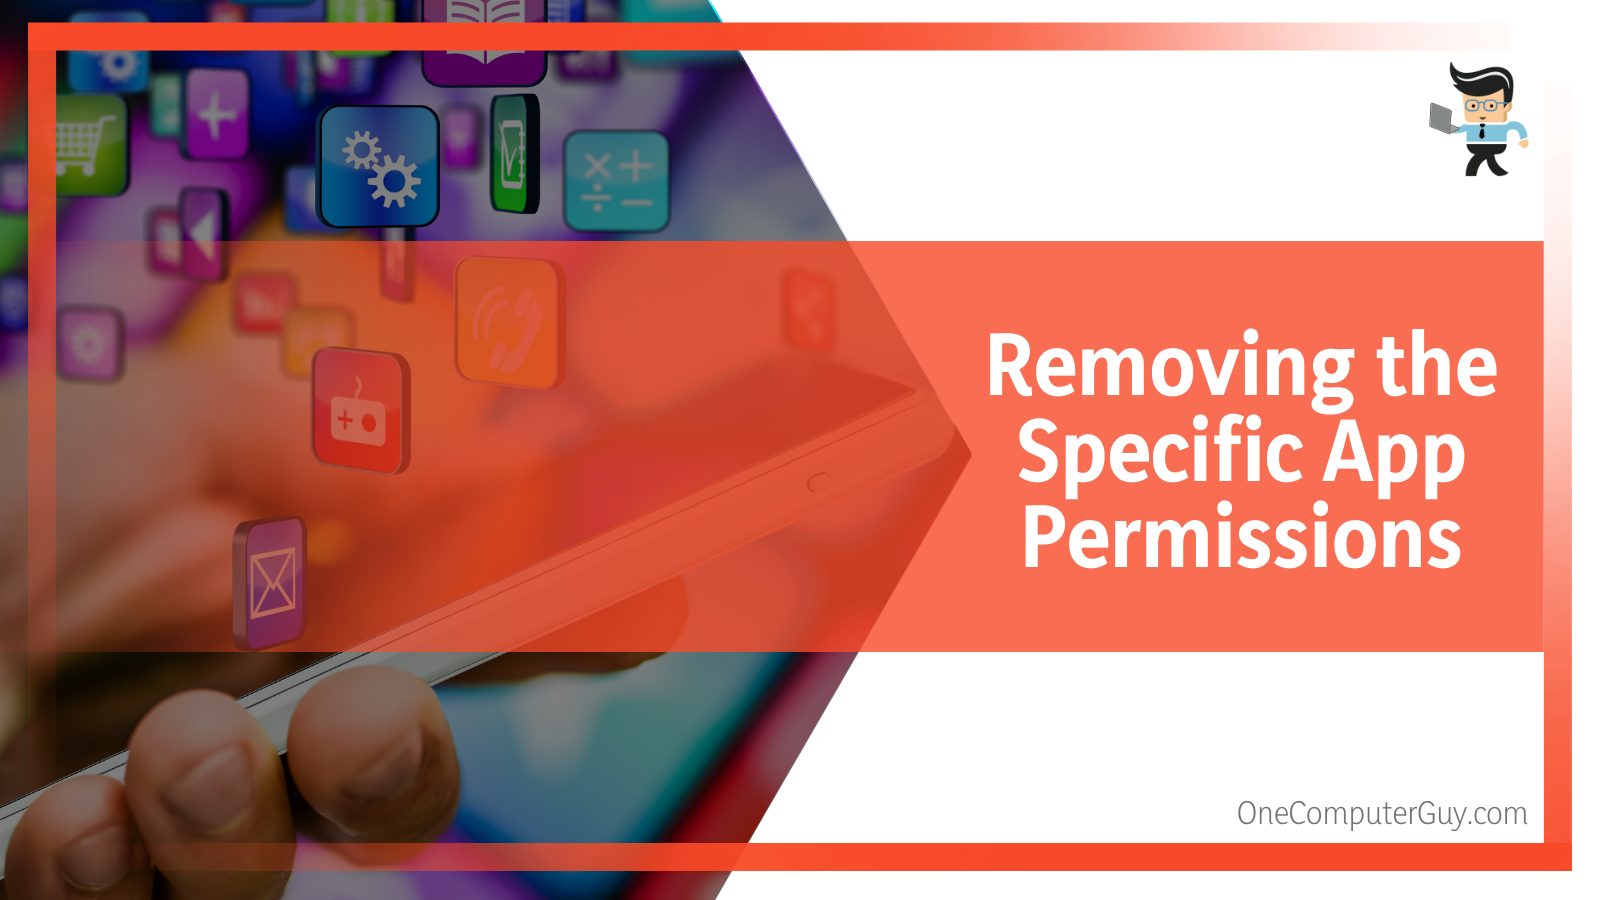 Removing the Specific App Permissions